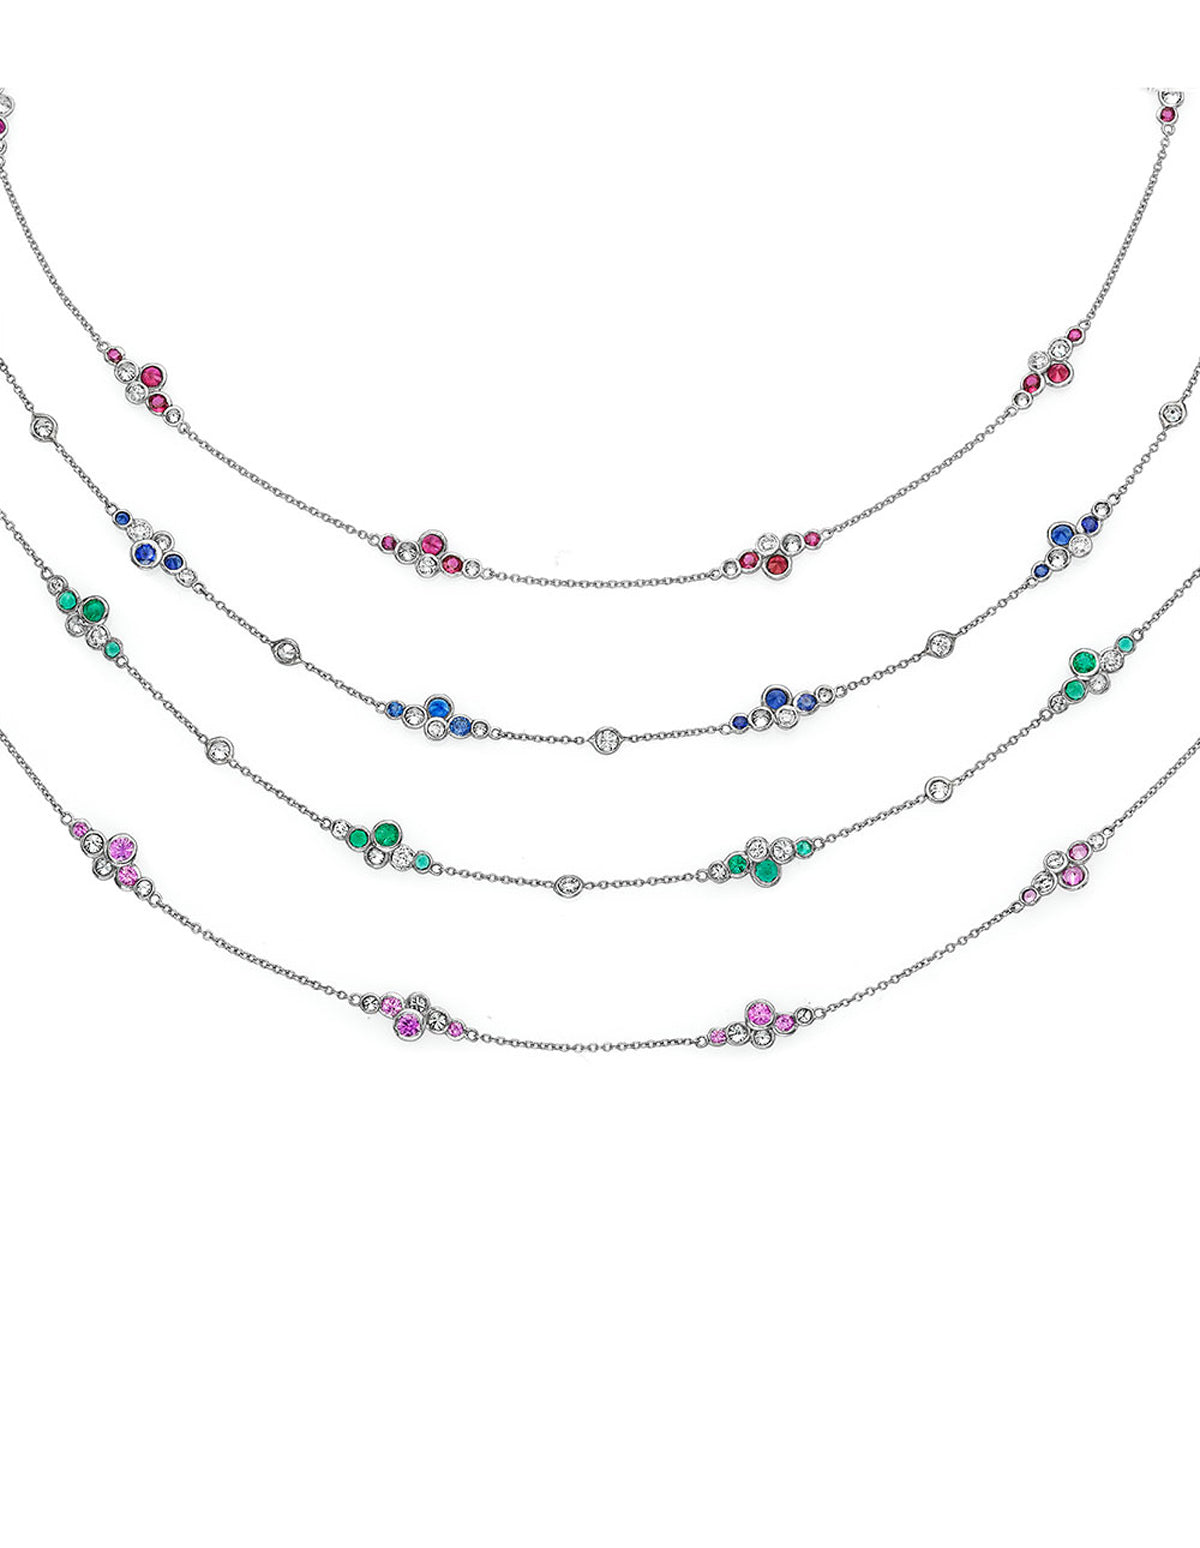 Platinum necklaces featuring ruby, sapphire, emerald and diamond necklaces by fine jeweler, Chicago's Lester Lampert.